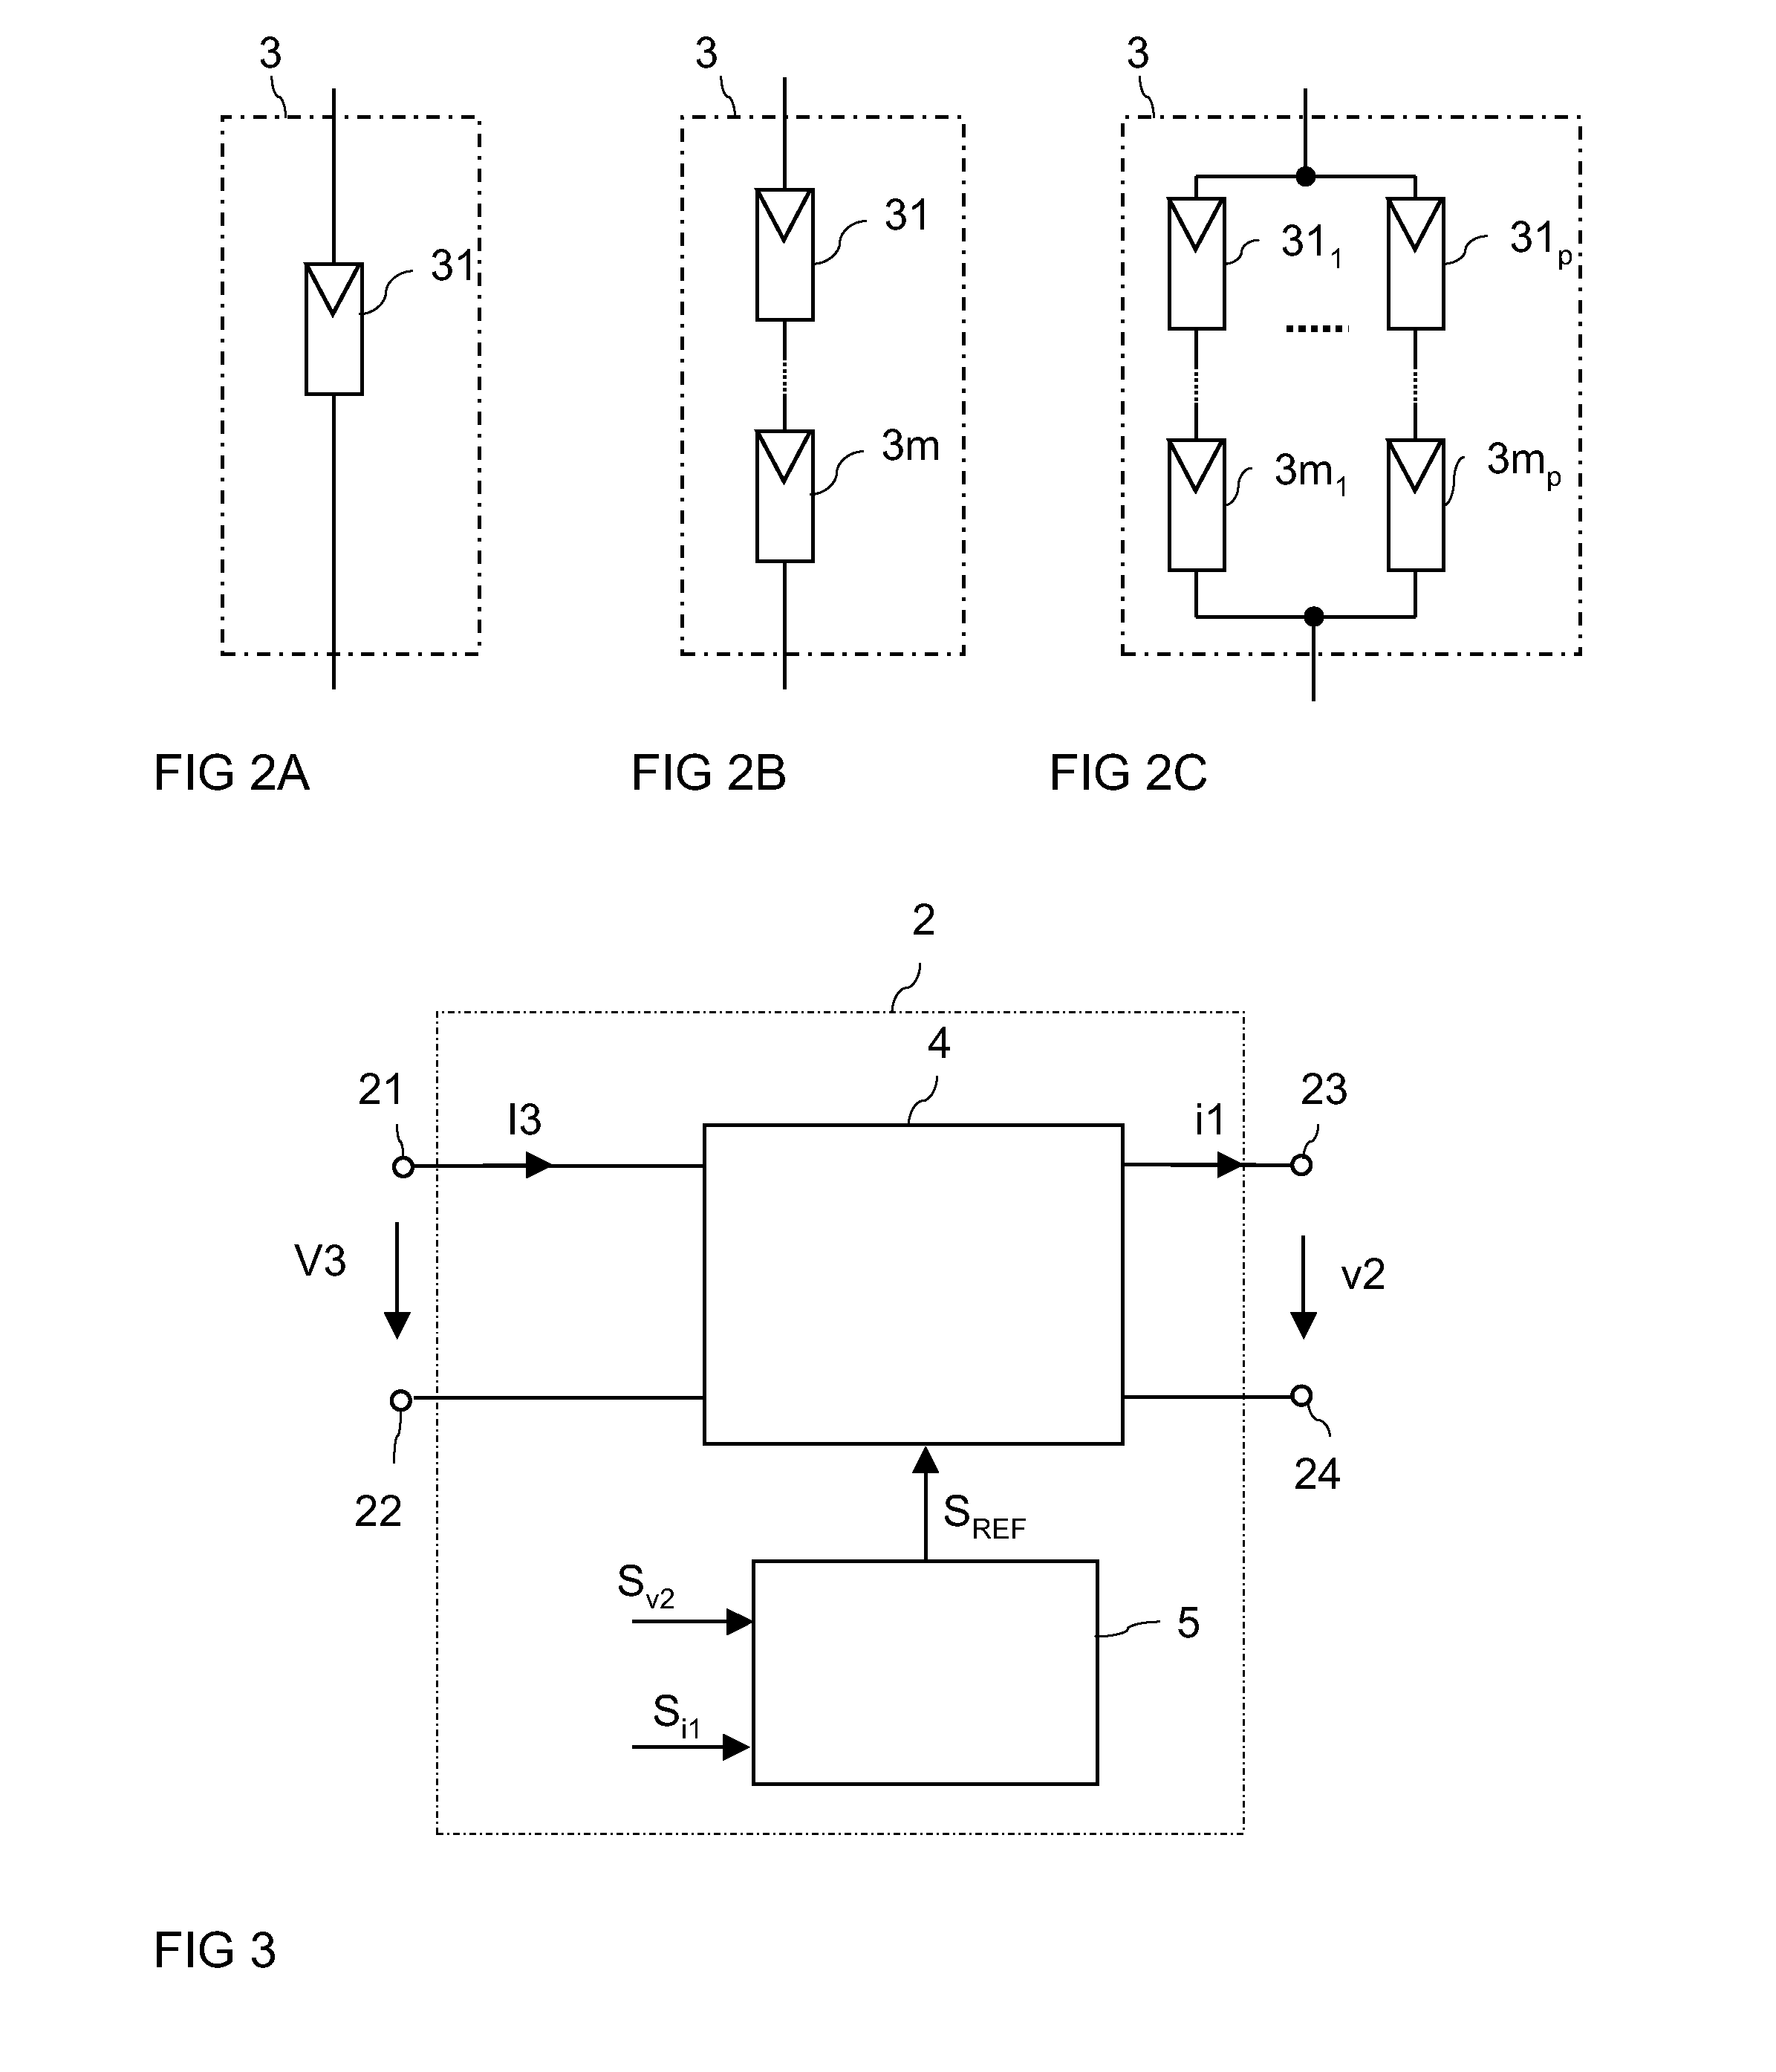 Power Converter Circuit with AC Output